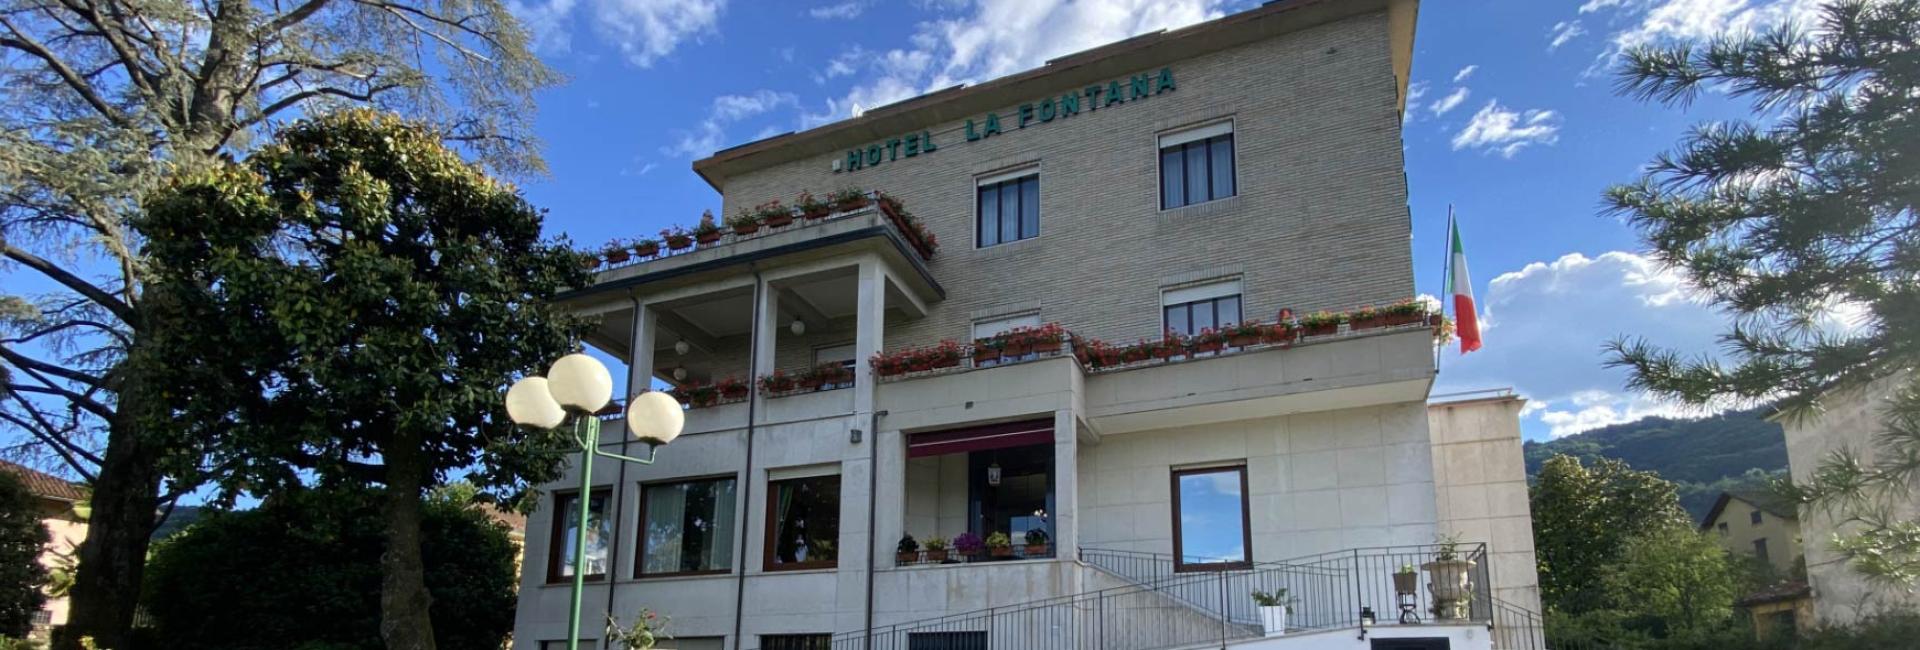 lafontanahotel en offer-holiday-july-n2 001